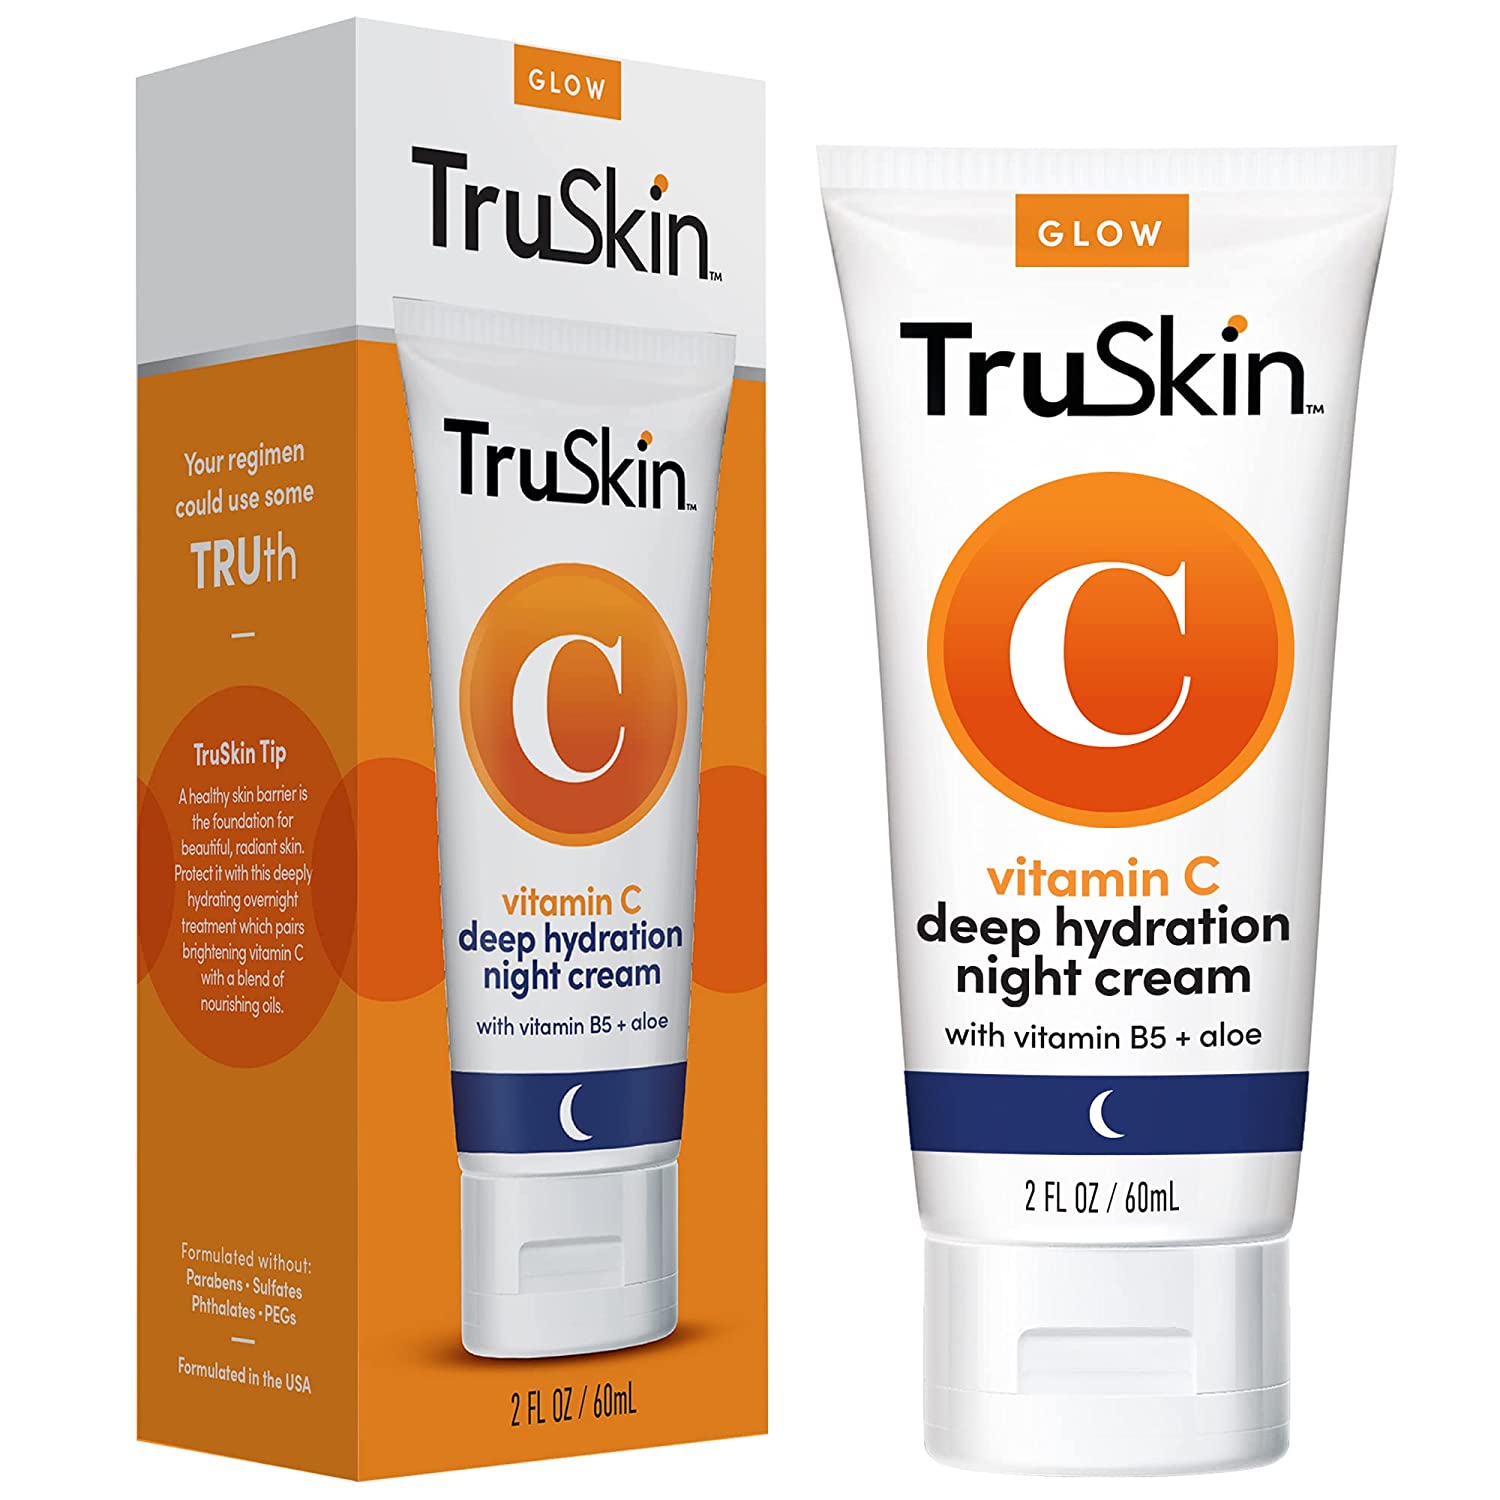 Review of TruSkin Vitamin C Night Cream, a Collagen Supporting Blend